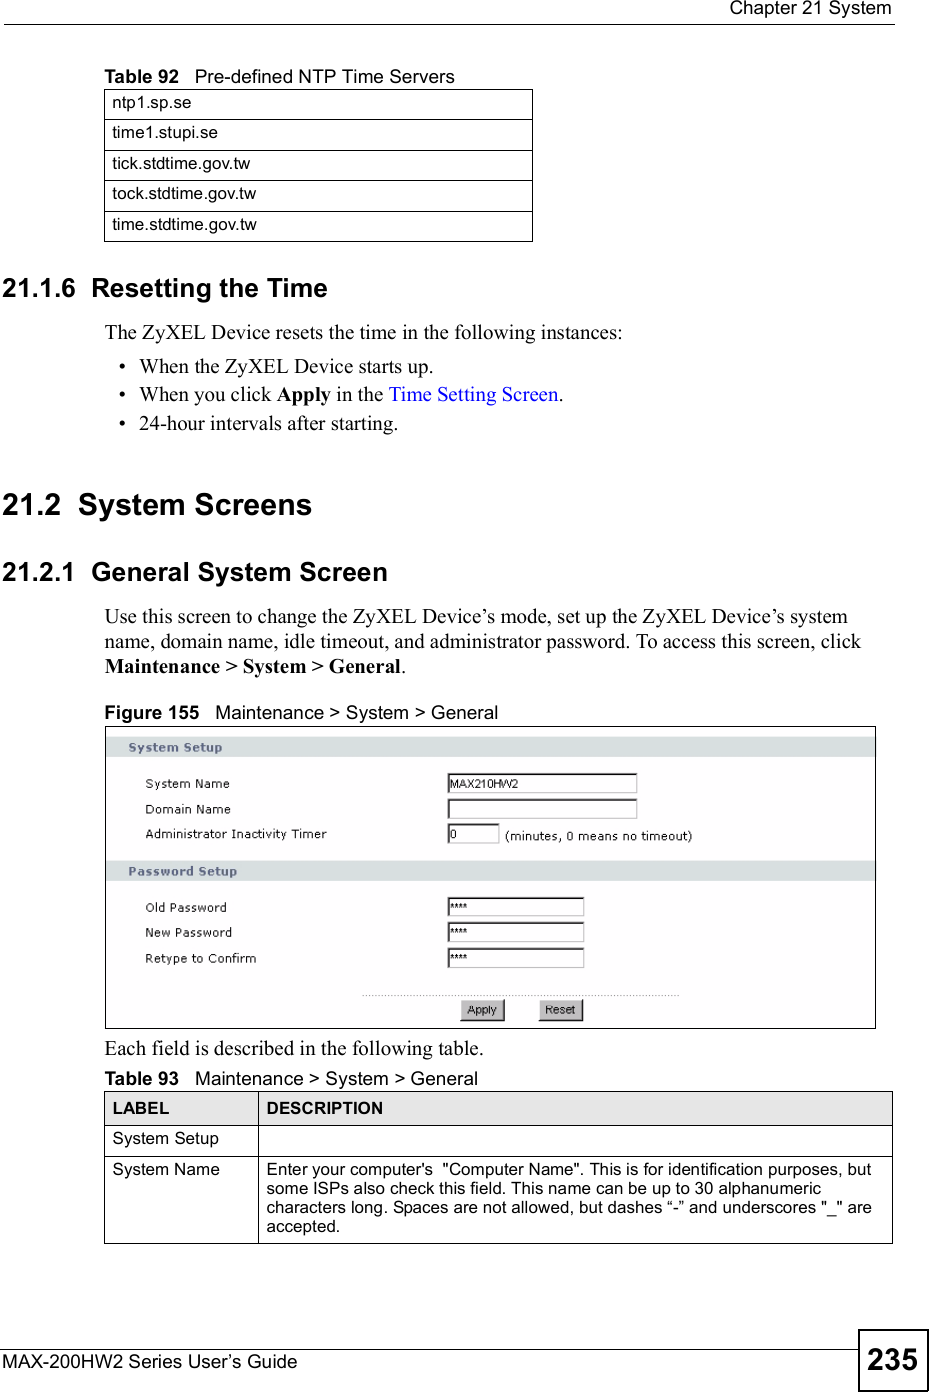  Chapter 21SystemMAX-200HW2 Series User s Guide 23521.1.6  Resetting the TimeThe ZyXEL Device resets the time in the following instances: When the ZyXEL Device starts up. When you click Apply in the Time Setting Screen. 24-hour intervals after starting.21.2  System Screens21.2.1  General System ScreenUse this screen to change the ZyXEL Device!s mode, set up the ZyXEL Device!s system name, domain name, idle timeout, and administrator password. To access this screen, click Maintenance &gt; System &gt; General.Figure 155   Maintenance &gt; System &gt; GeneralEach field is described in the following table.ntp1.sp.setime1.stupi.setick.stdtime.gov.twtock.stdtime.gov.twtime.stdtime.gov.twTable 92   Pre-defined NTP Time ServersTable 93   Maintenance &gt; System &gt; GeneralLABEL DESCRIPTIONSystem SetupSystem NameEnter your computer&apos;s  &quot;Computer Name&quot;. This is for identification purposes, but some ISPs also check this field. This name can be up to 30 alphanumeric characters long. Spaces are not allowed, but dashes !-&quot; and underscores &quot;_&quot; are accepted.